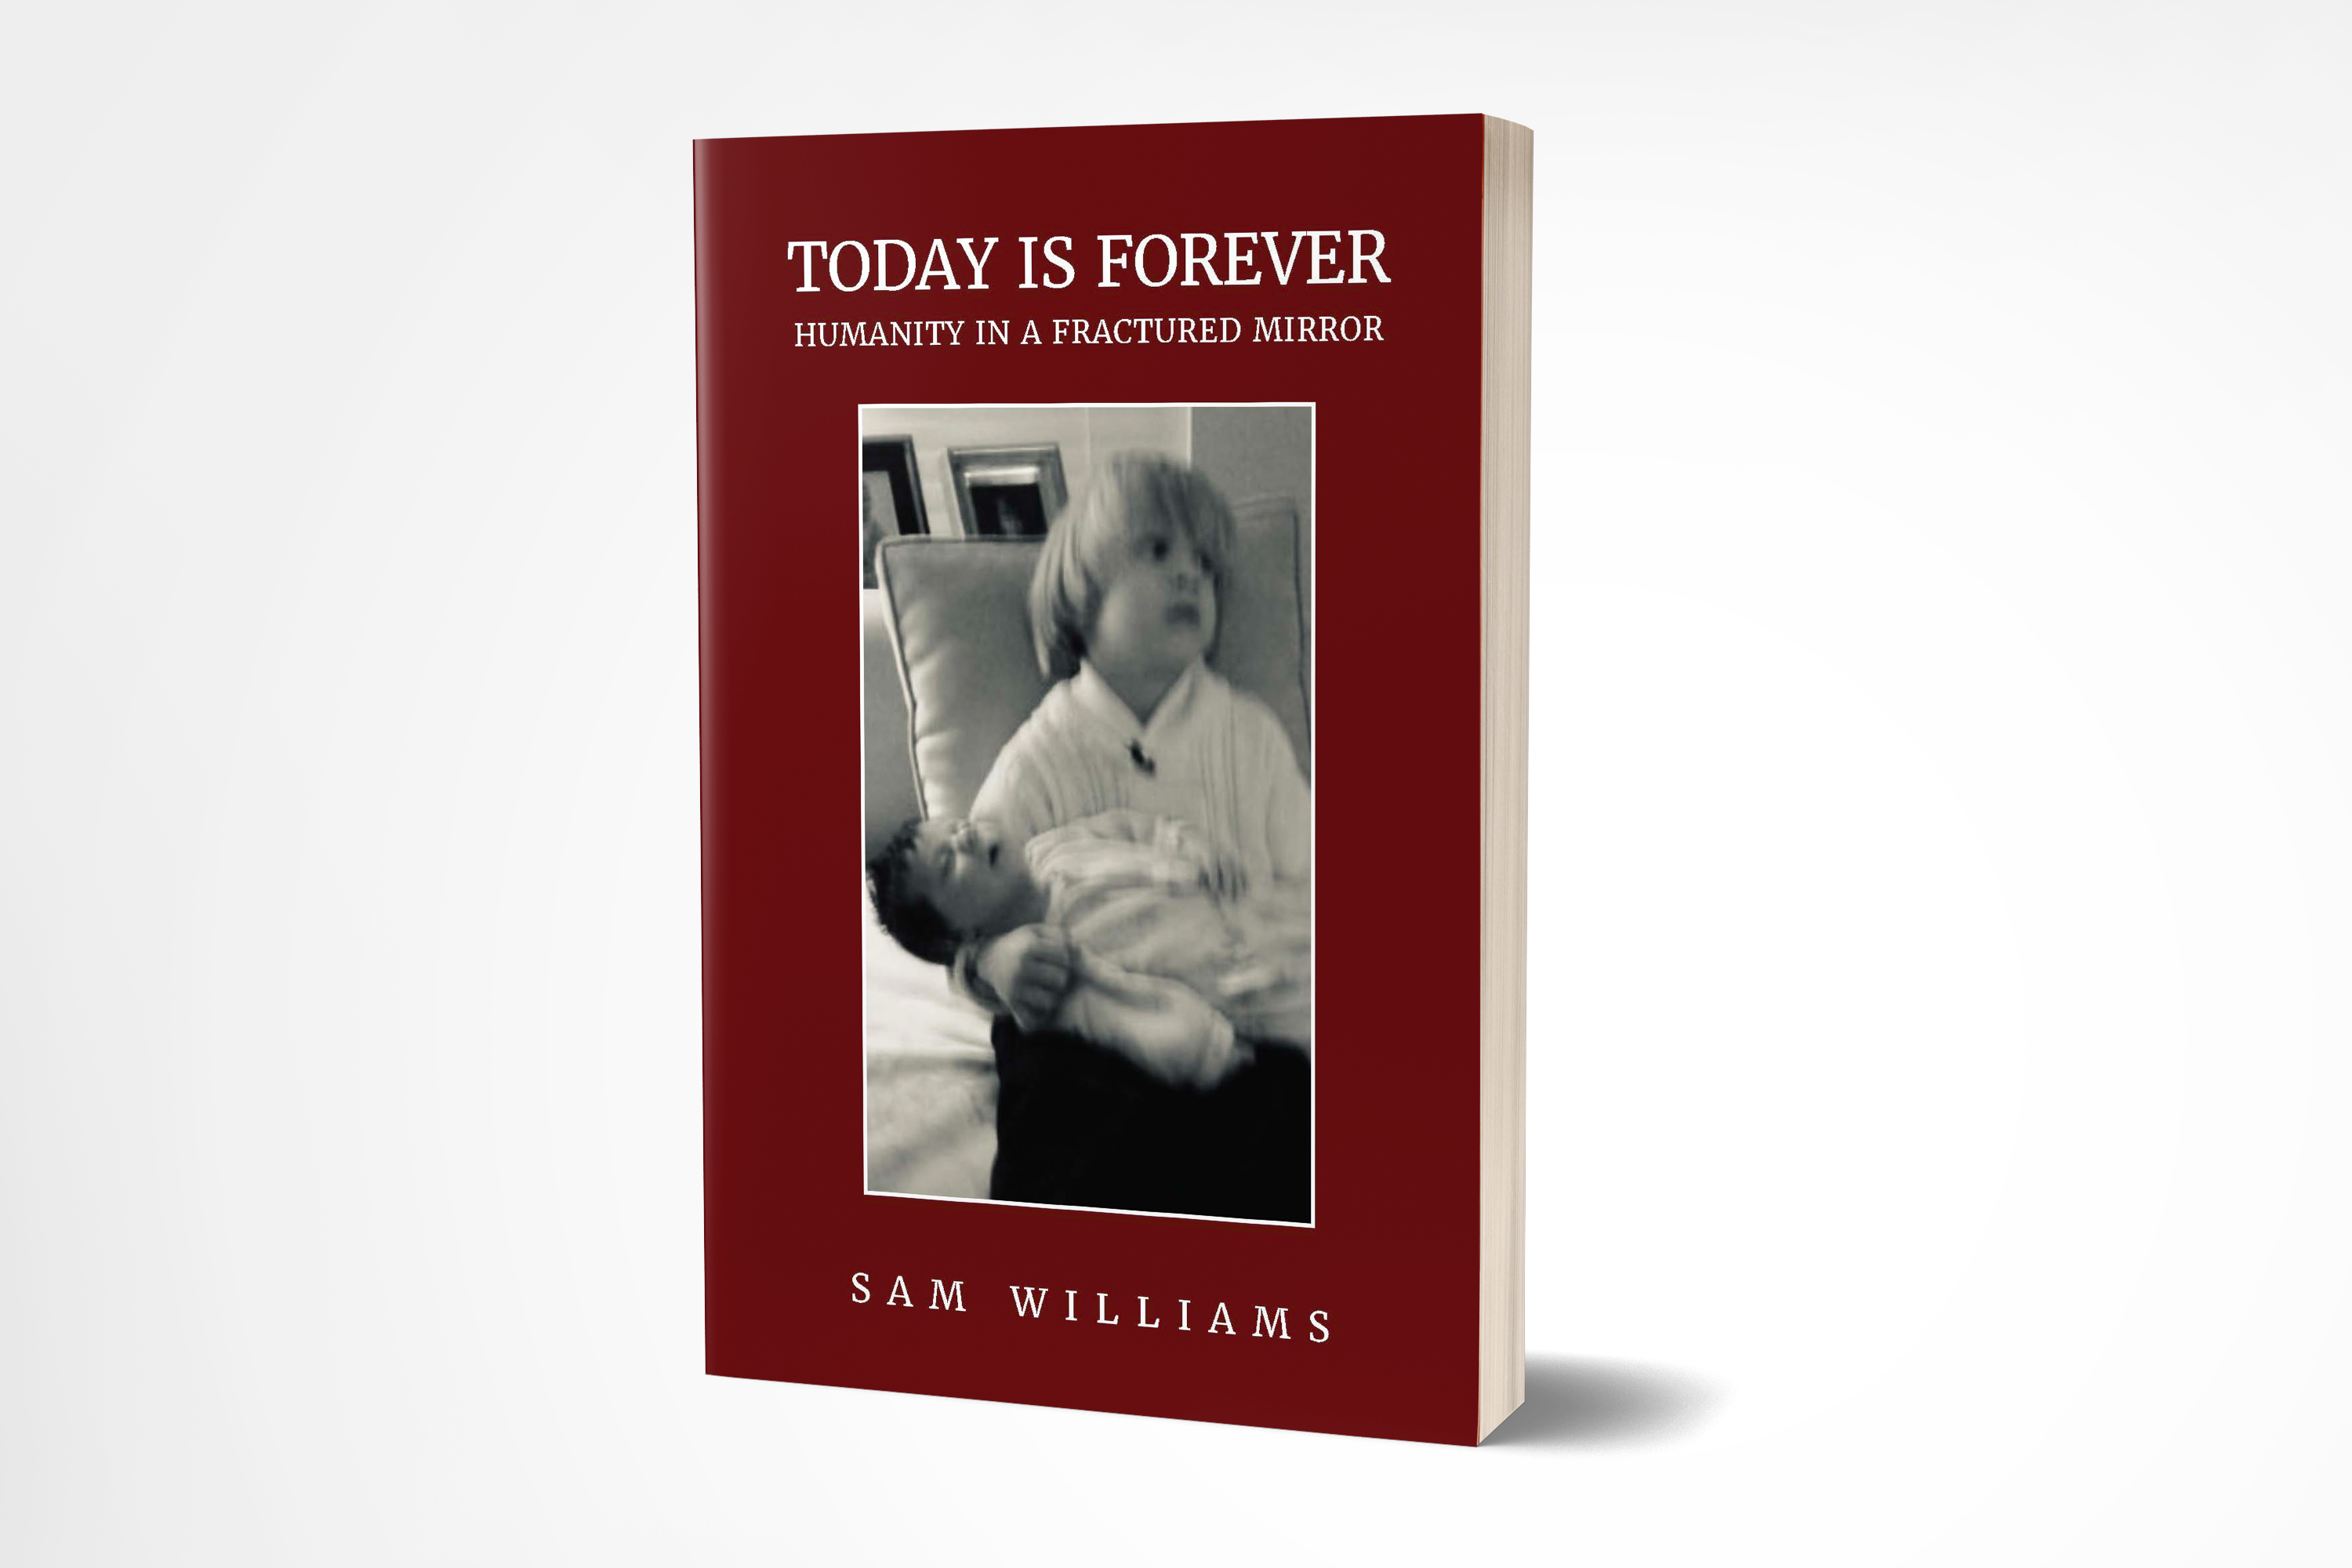 Today is Forever: Humanity in a Fractured Mirror